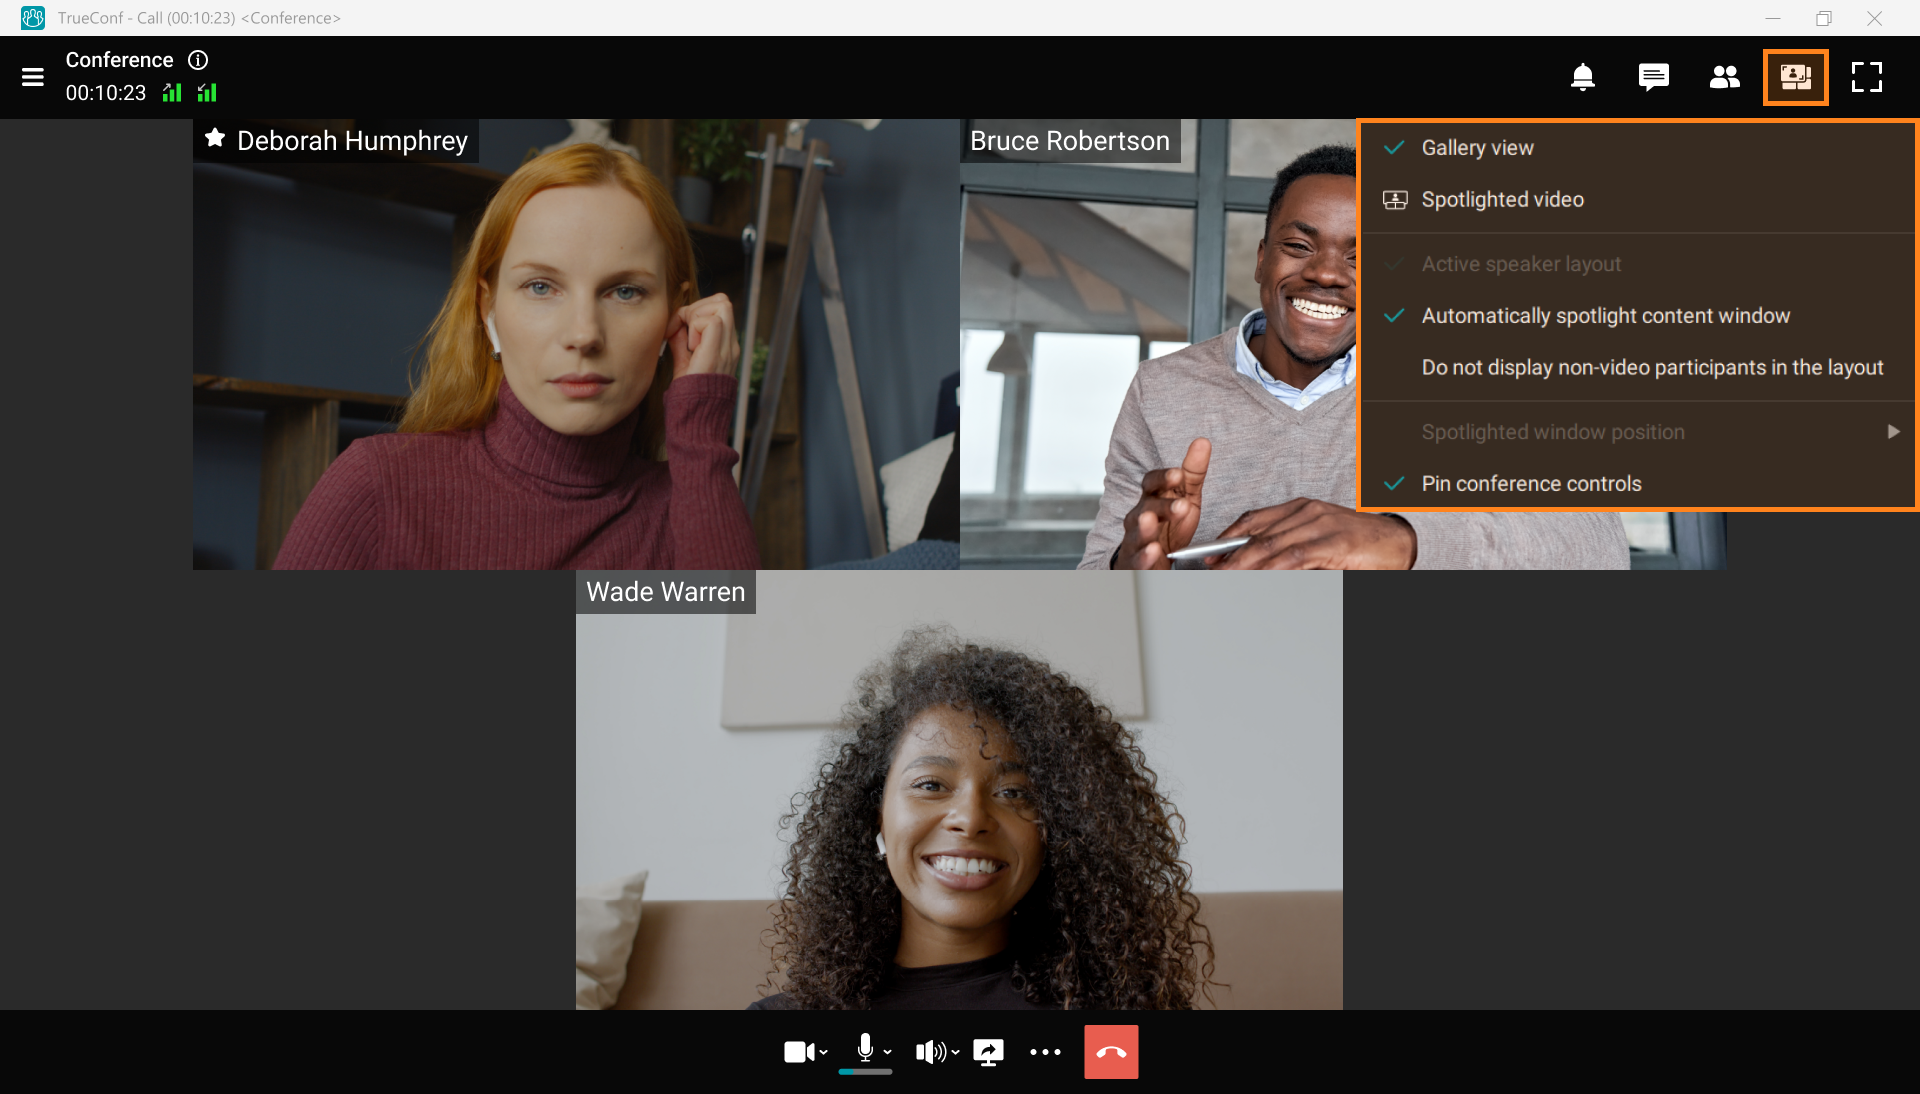 TrueConf 8.1 for Windows: Enhanced team messaging, media player for recordings, and automatic content spotlight 7